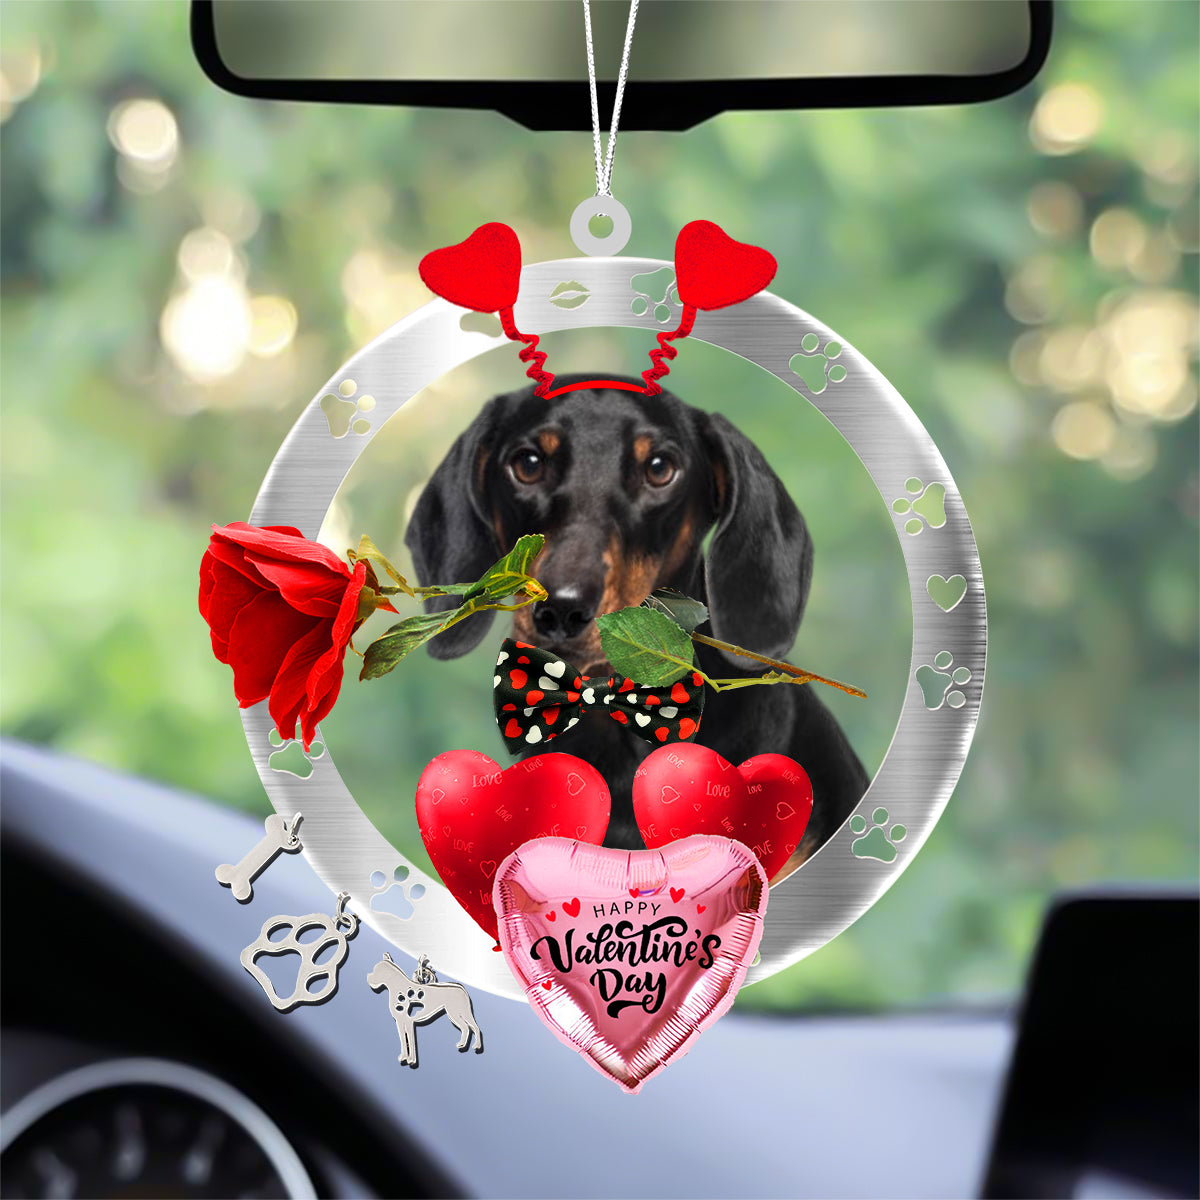 Dachshund With Rose & Heart Balloon Ornament